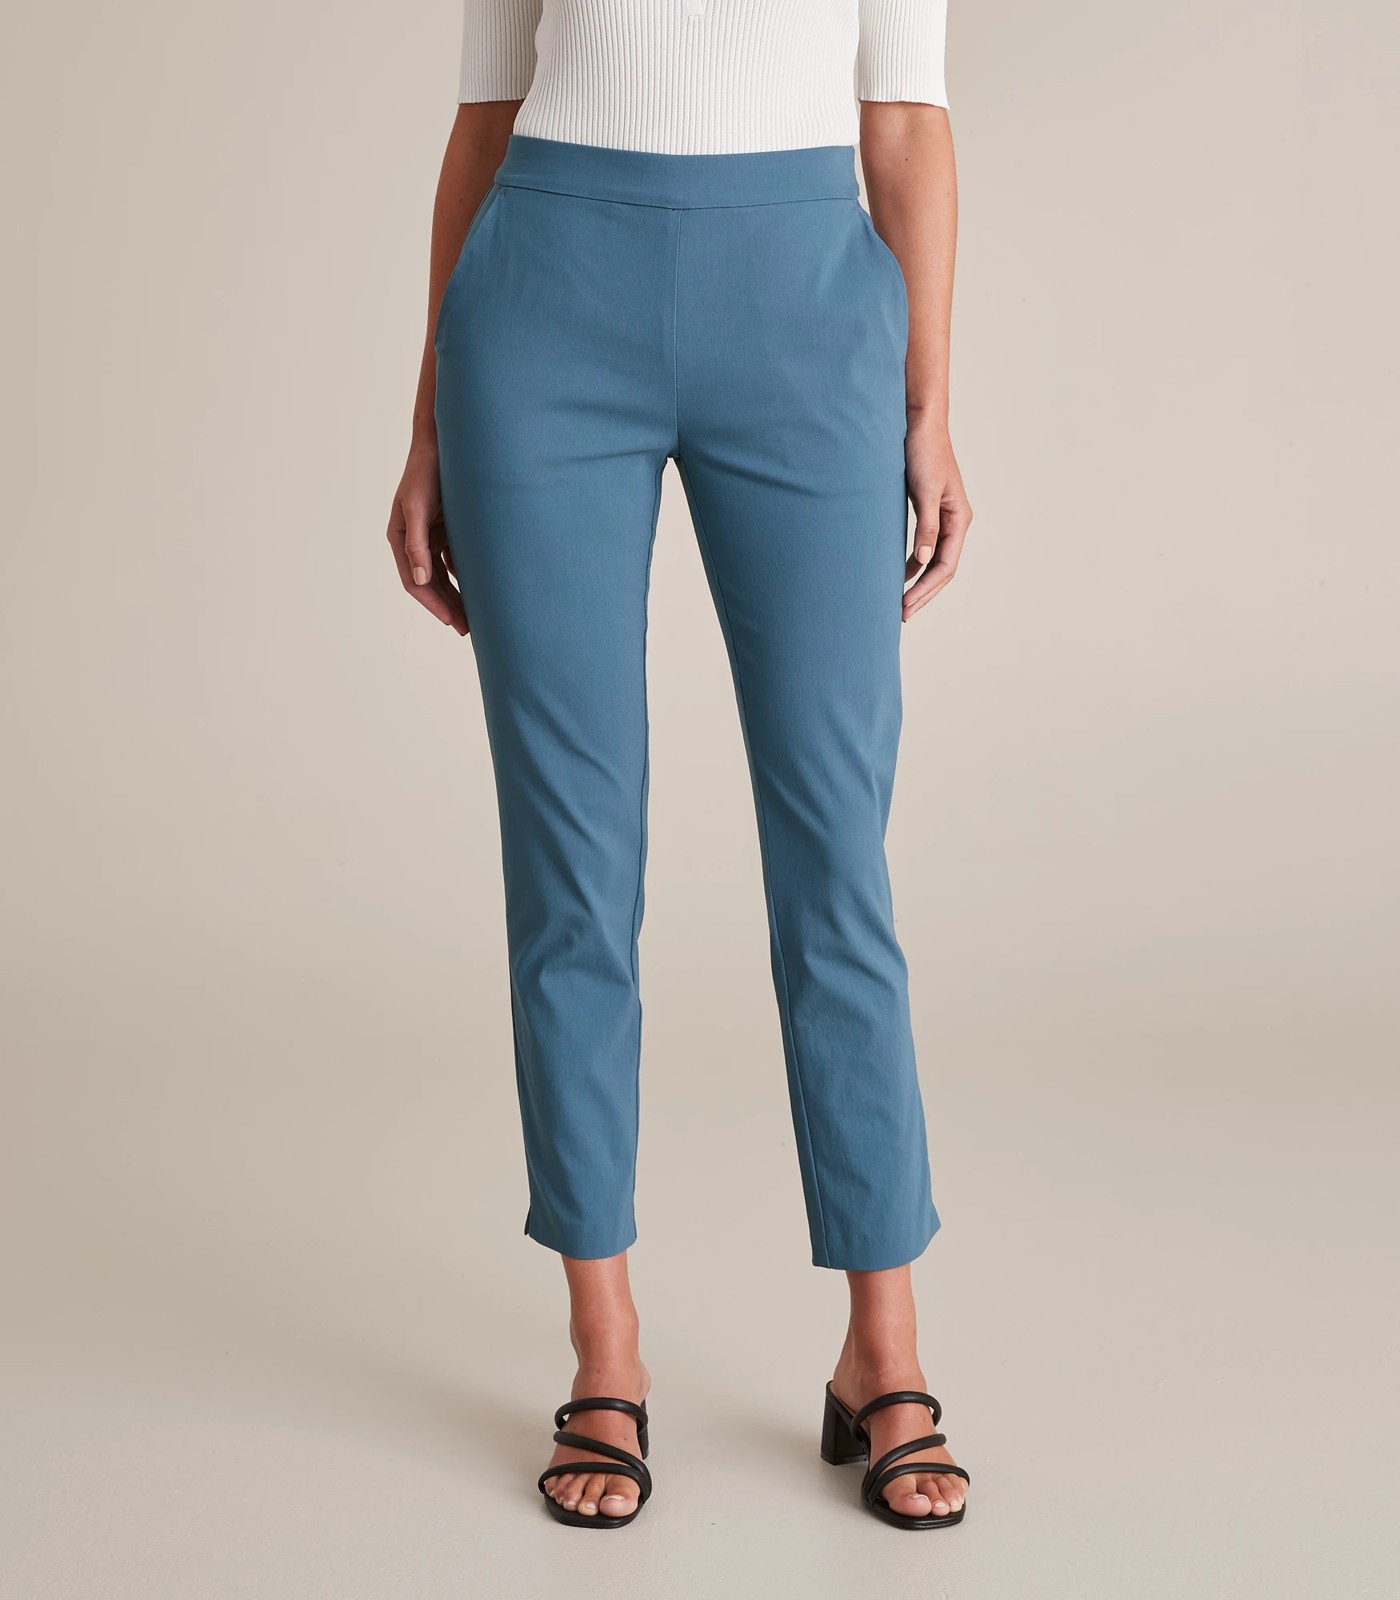 Preview Carrie Ankle Length Bengaline Cigar Pants